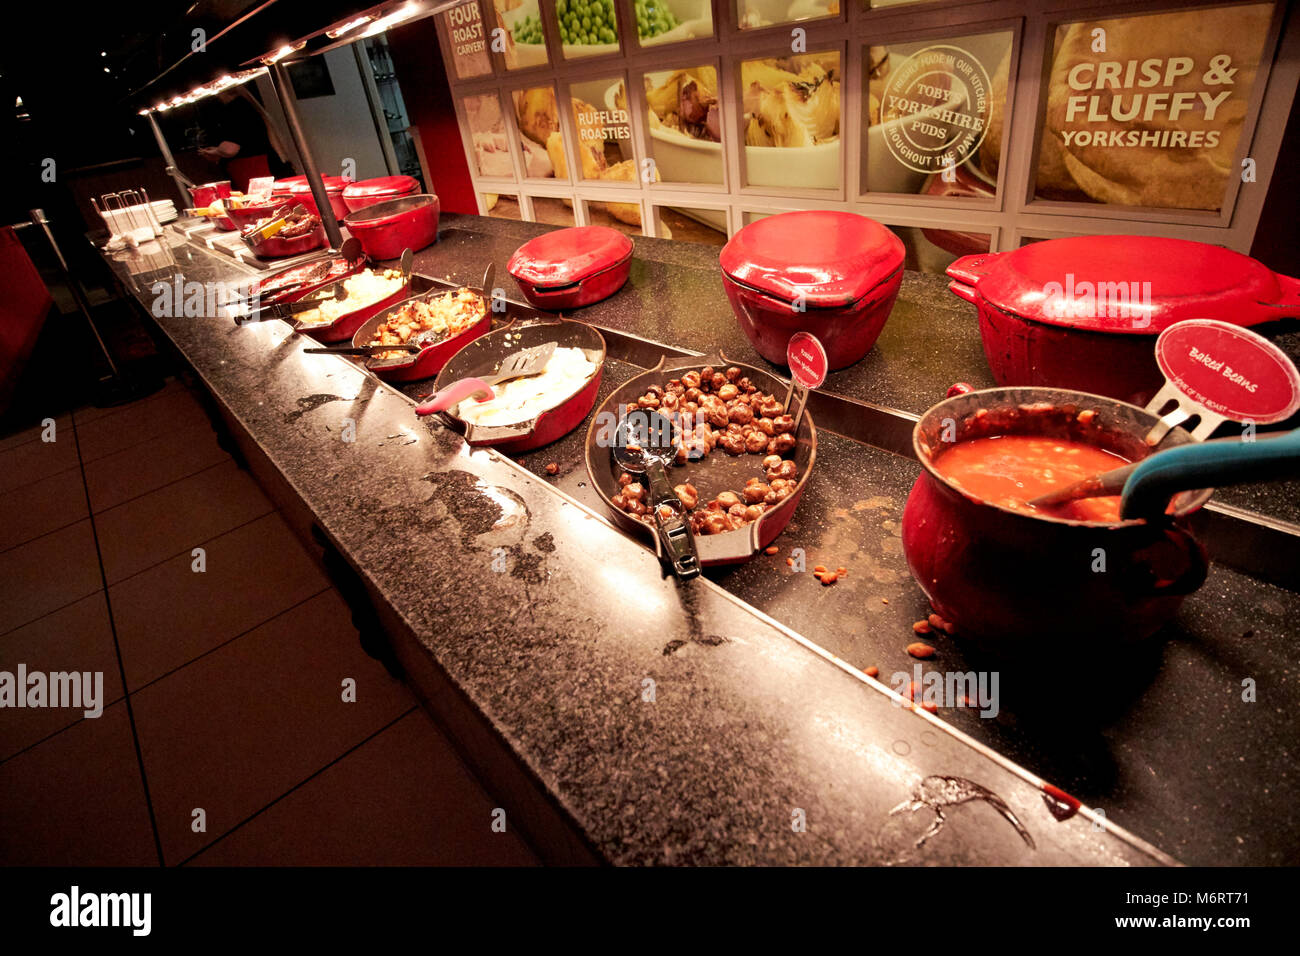 toby buffet carvery all you can eat breakfast in the uk Stock Photo